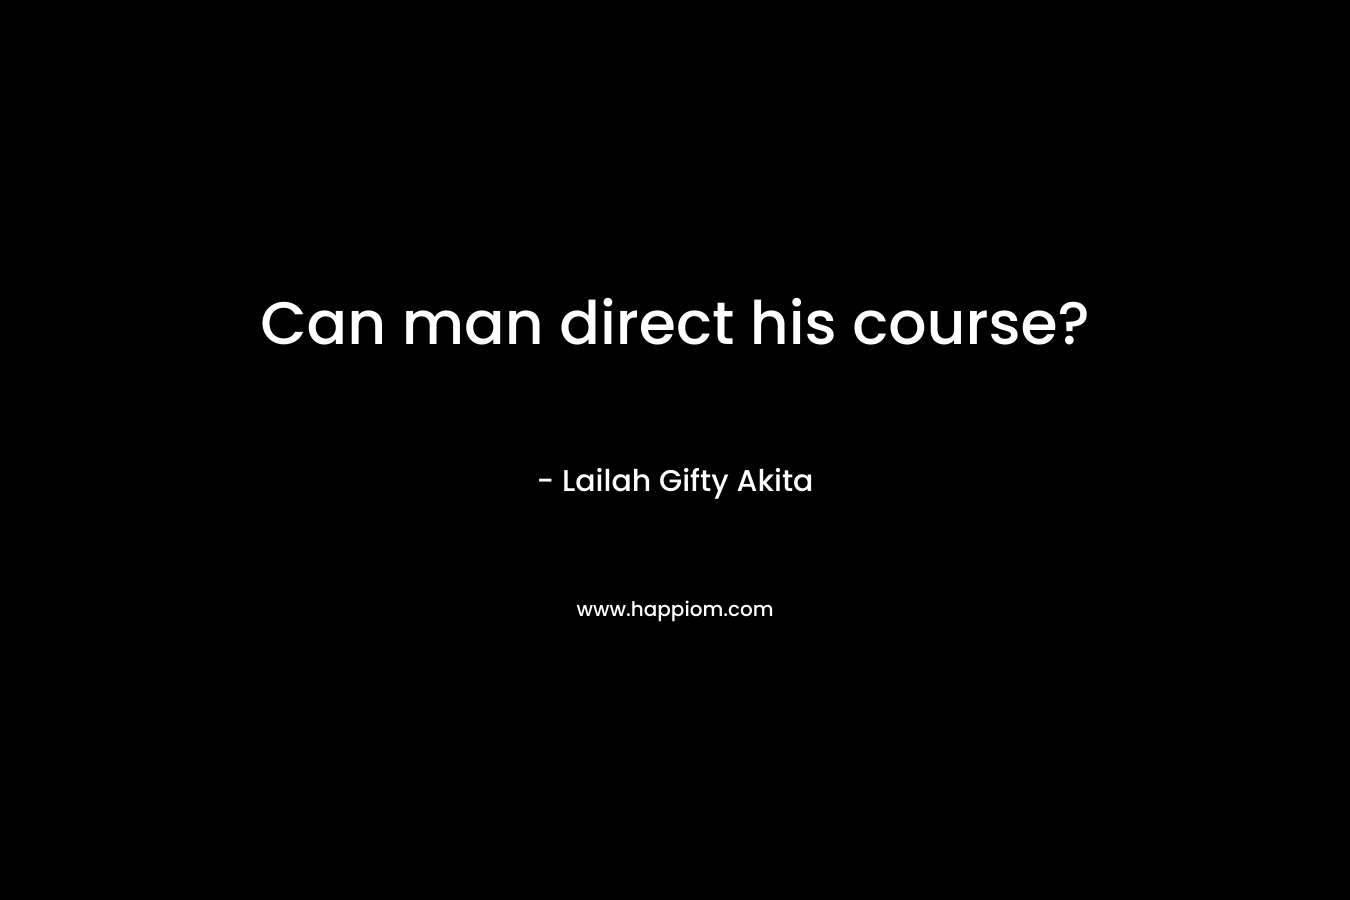 Can man direct his course?